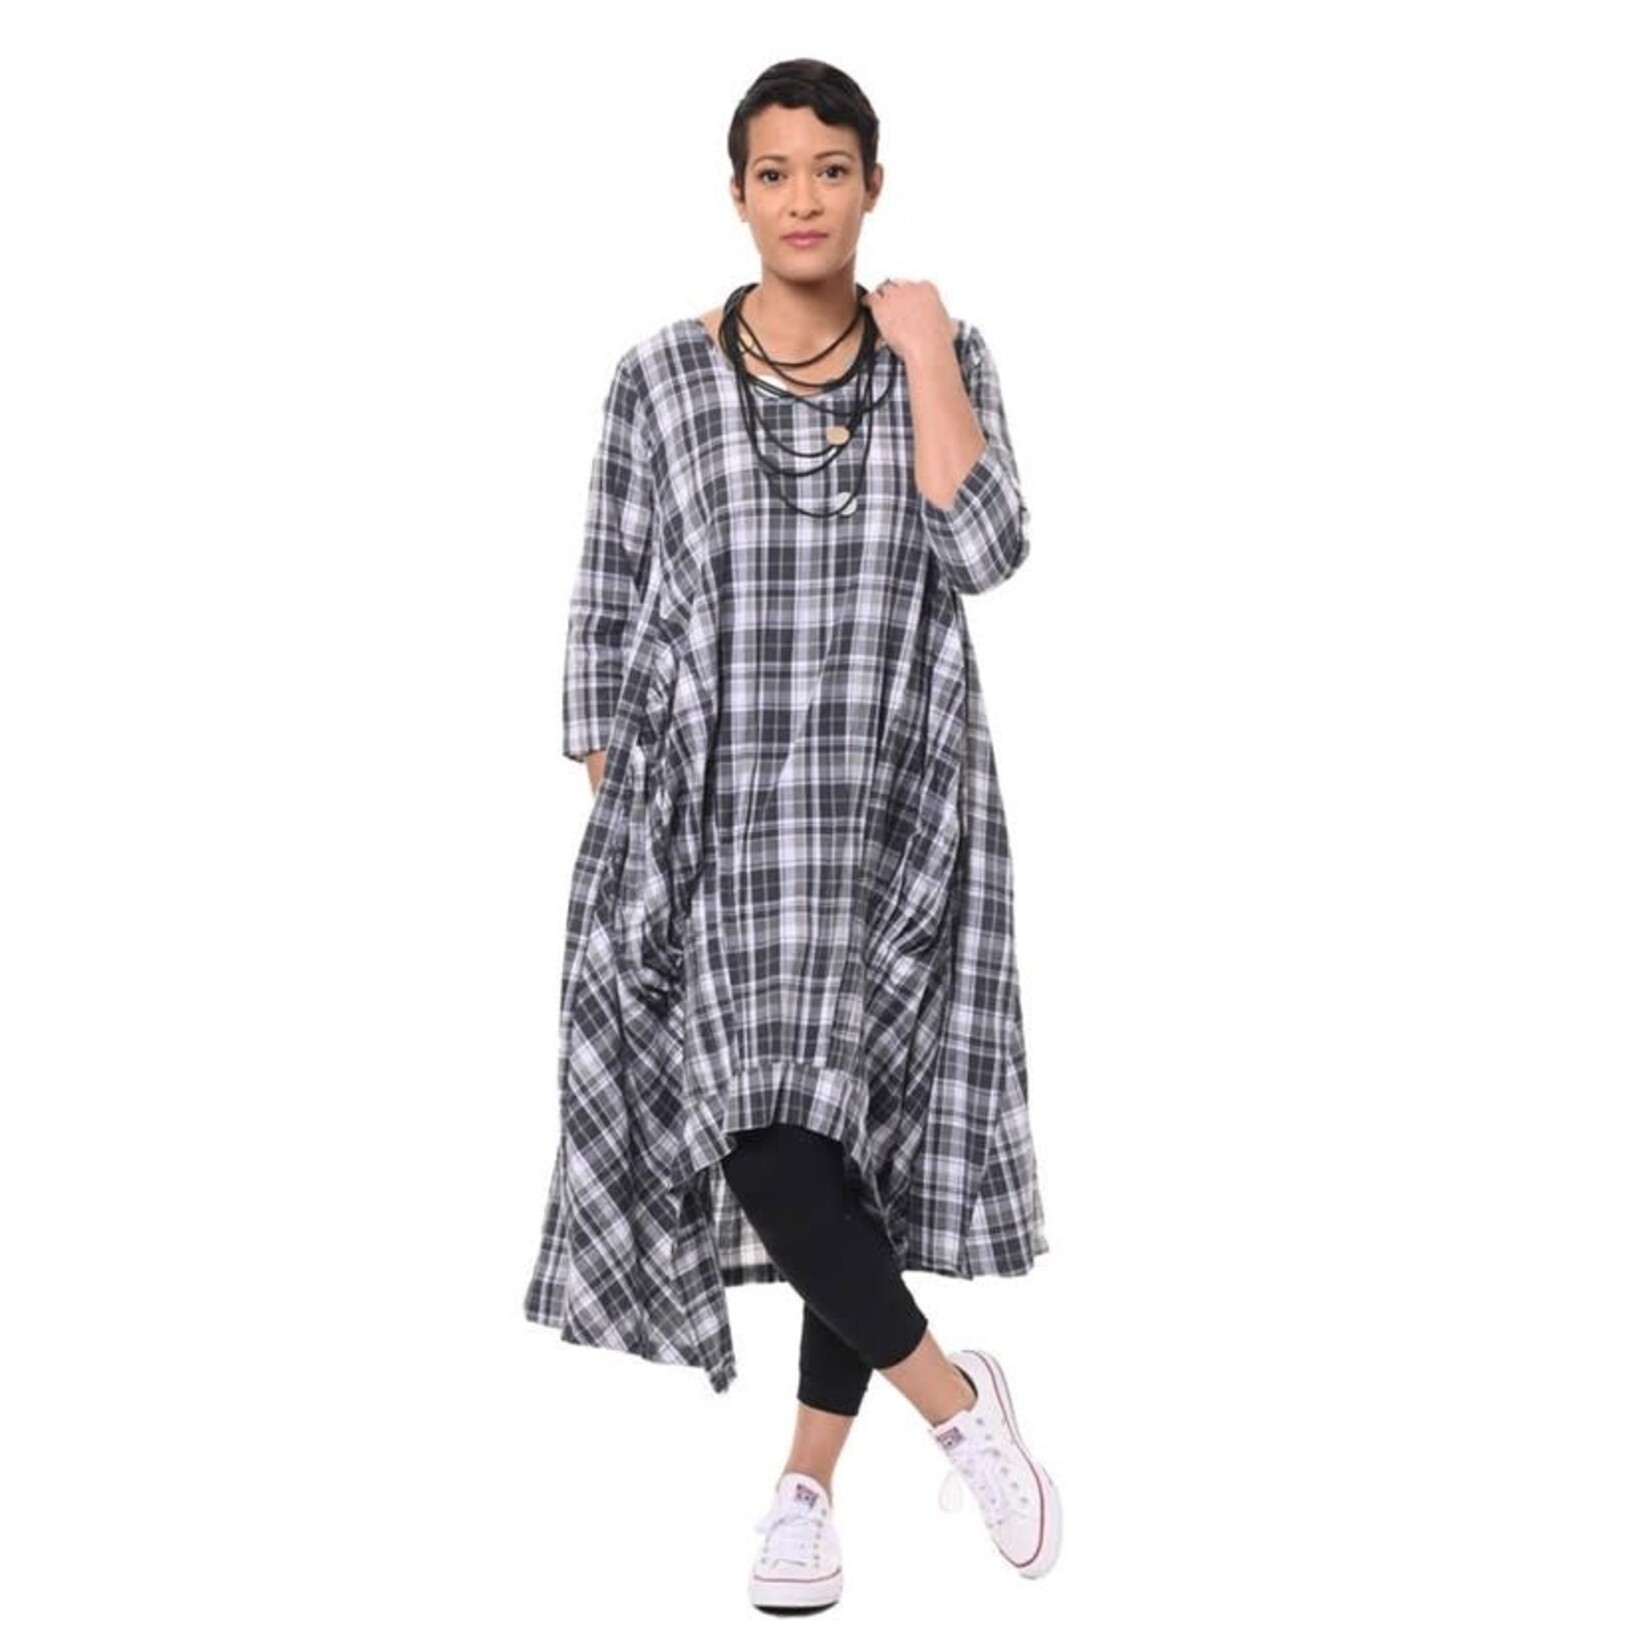 Tulip Clothing Lexi Dress in Grayscale Check Medium